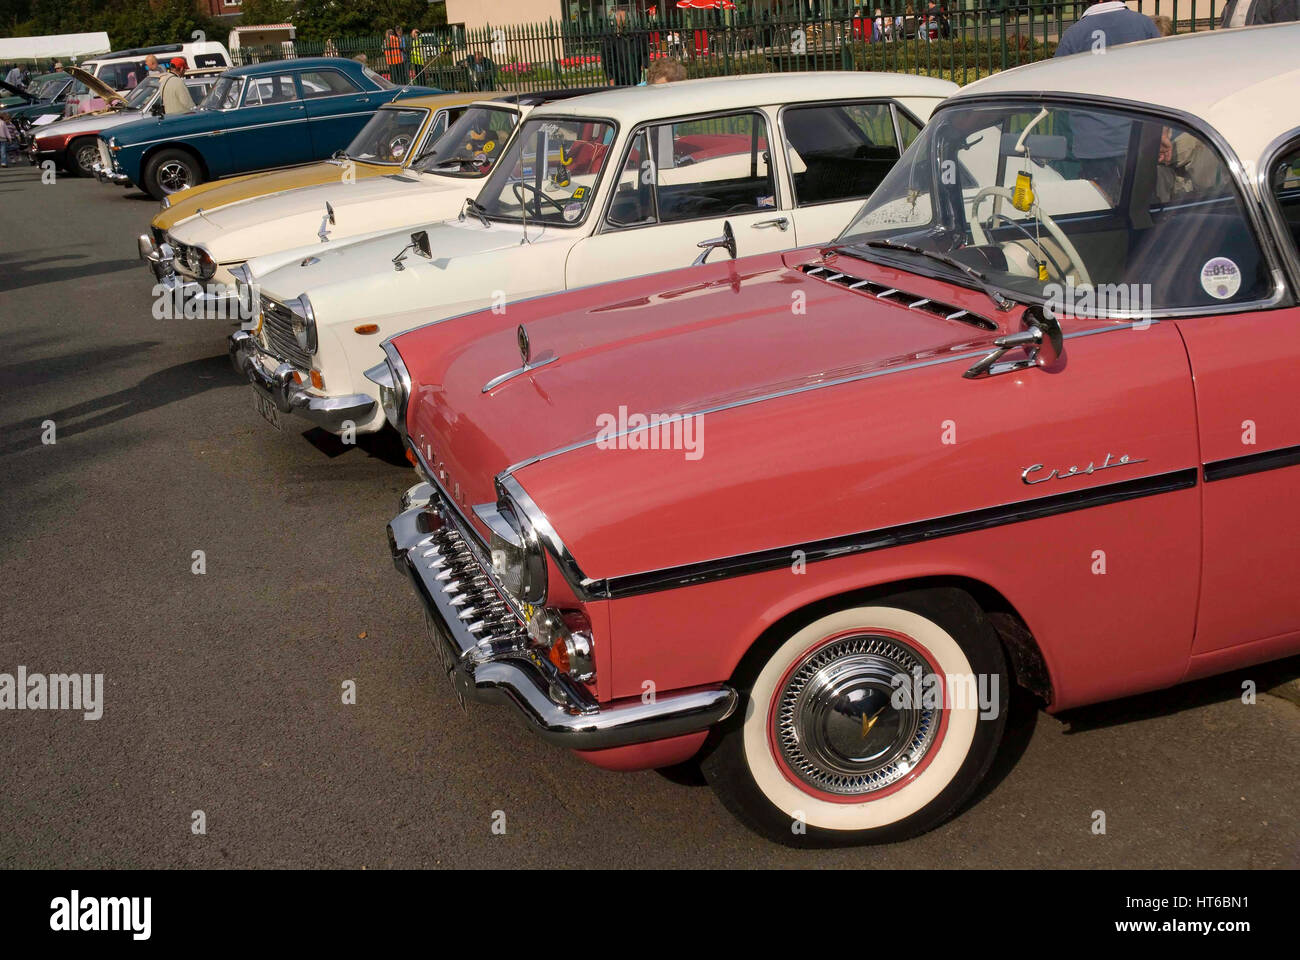 Vintage carrally. Vauxhall Cresta in the foreground. Stock Photo